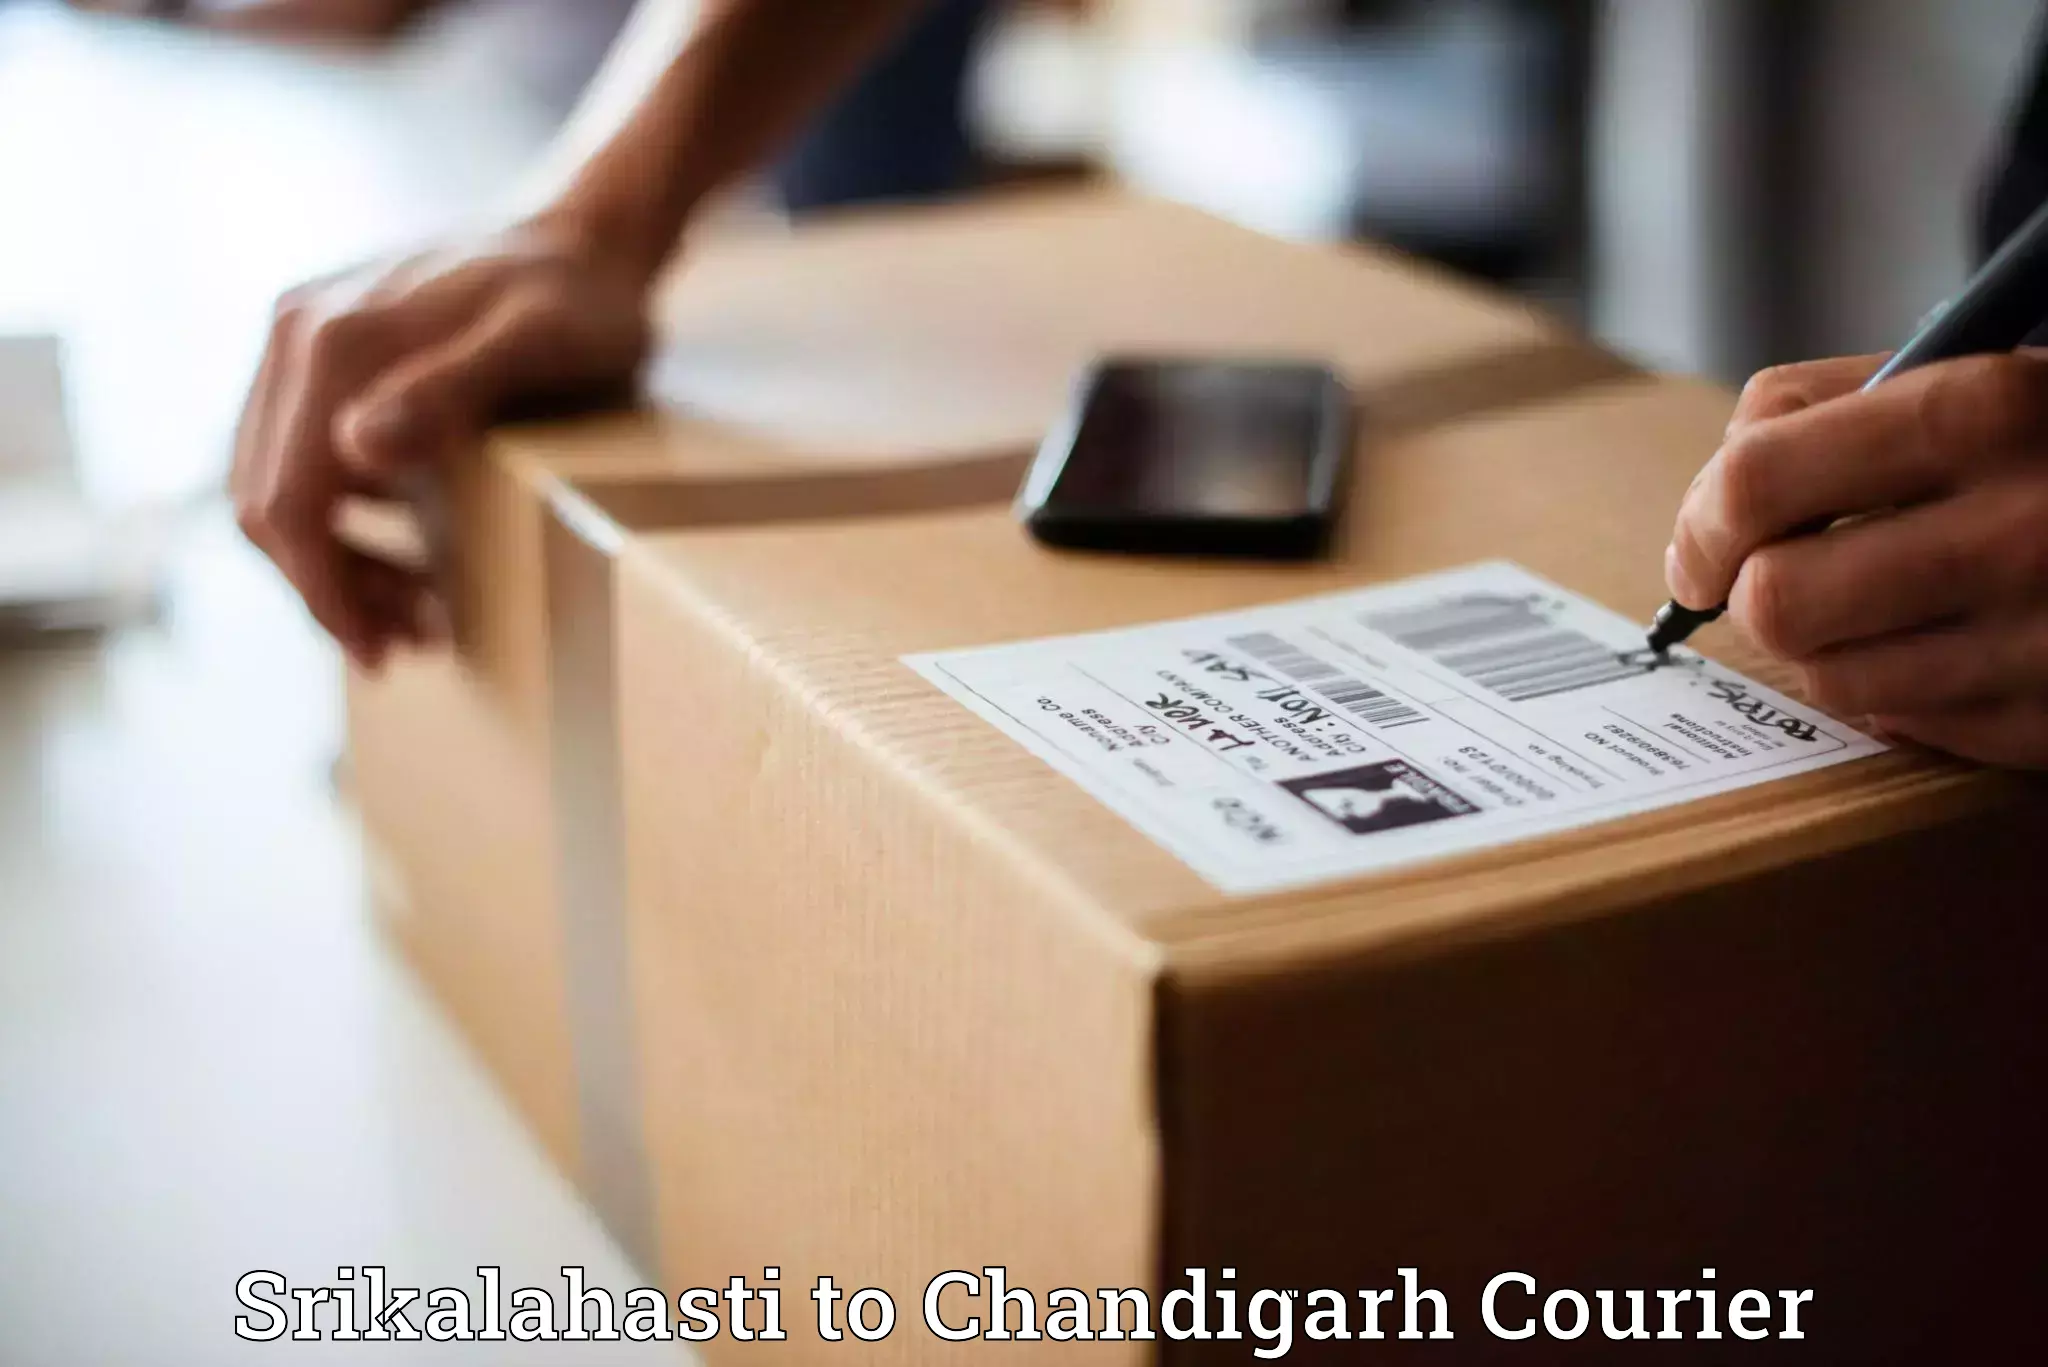 Parcel handling and care in Srikalahasti to Chandigarh